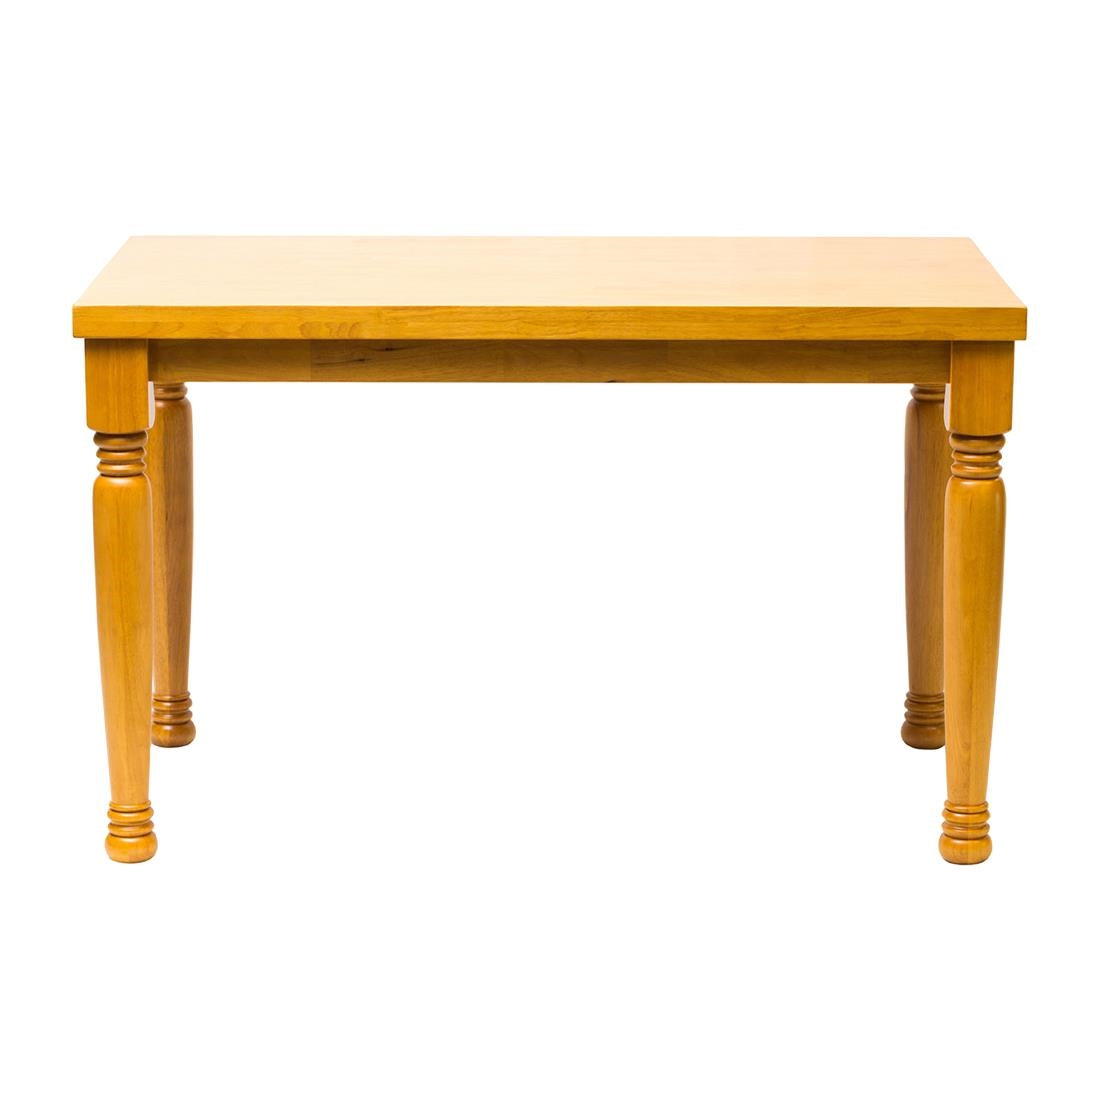 FT494 Cotswold Soft Oak Rectangular Dining Table 1200x700mm JD Catering Equipment Solutions Ltd